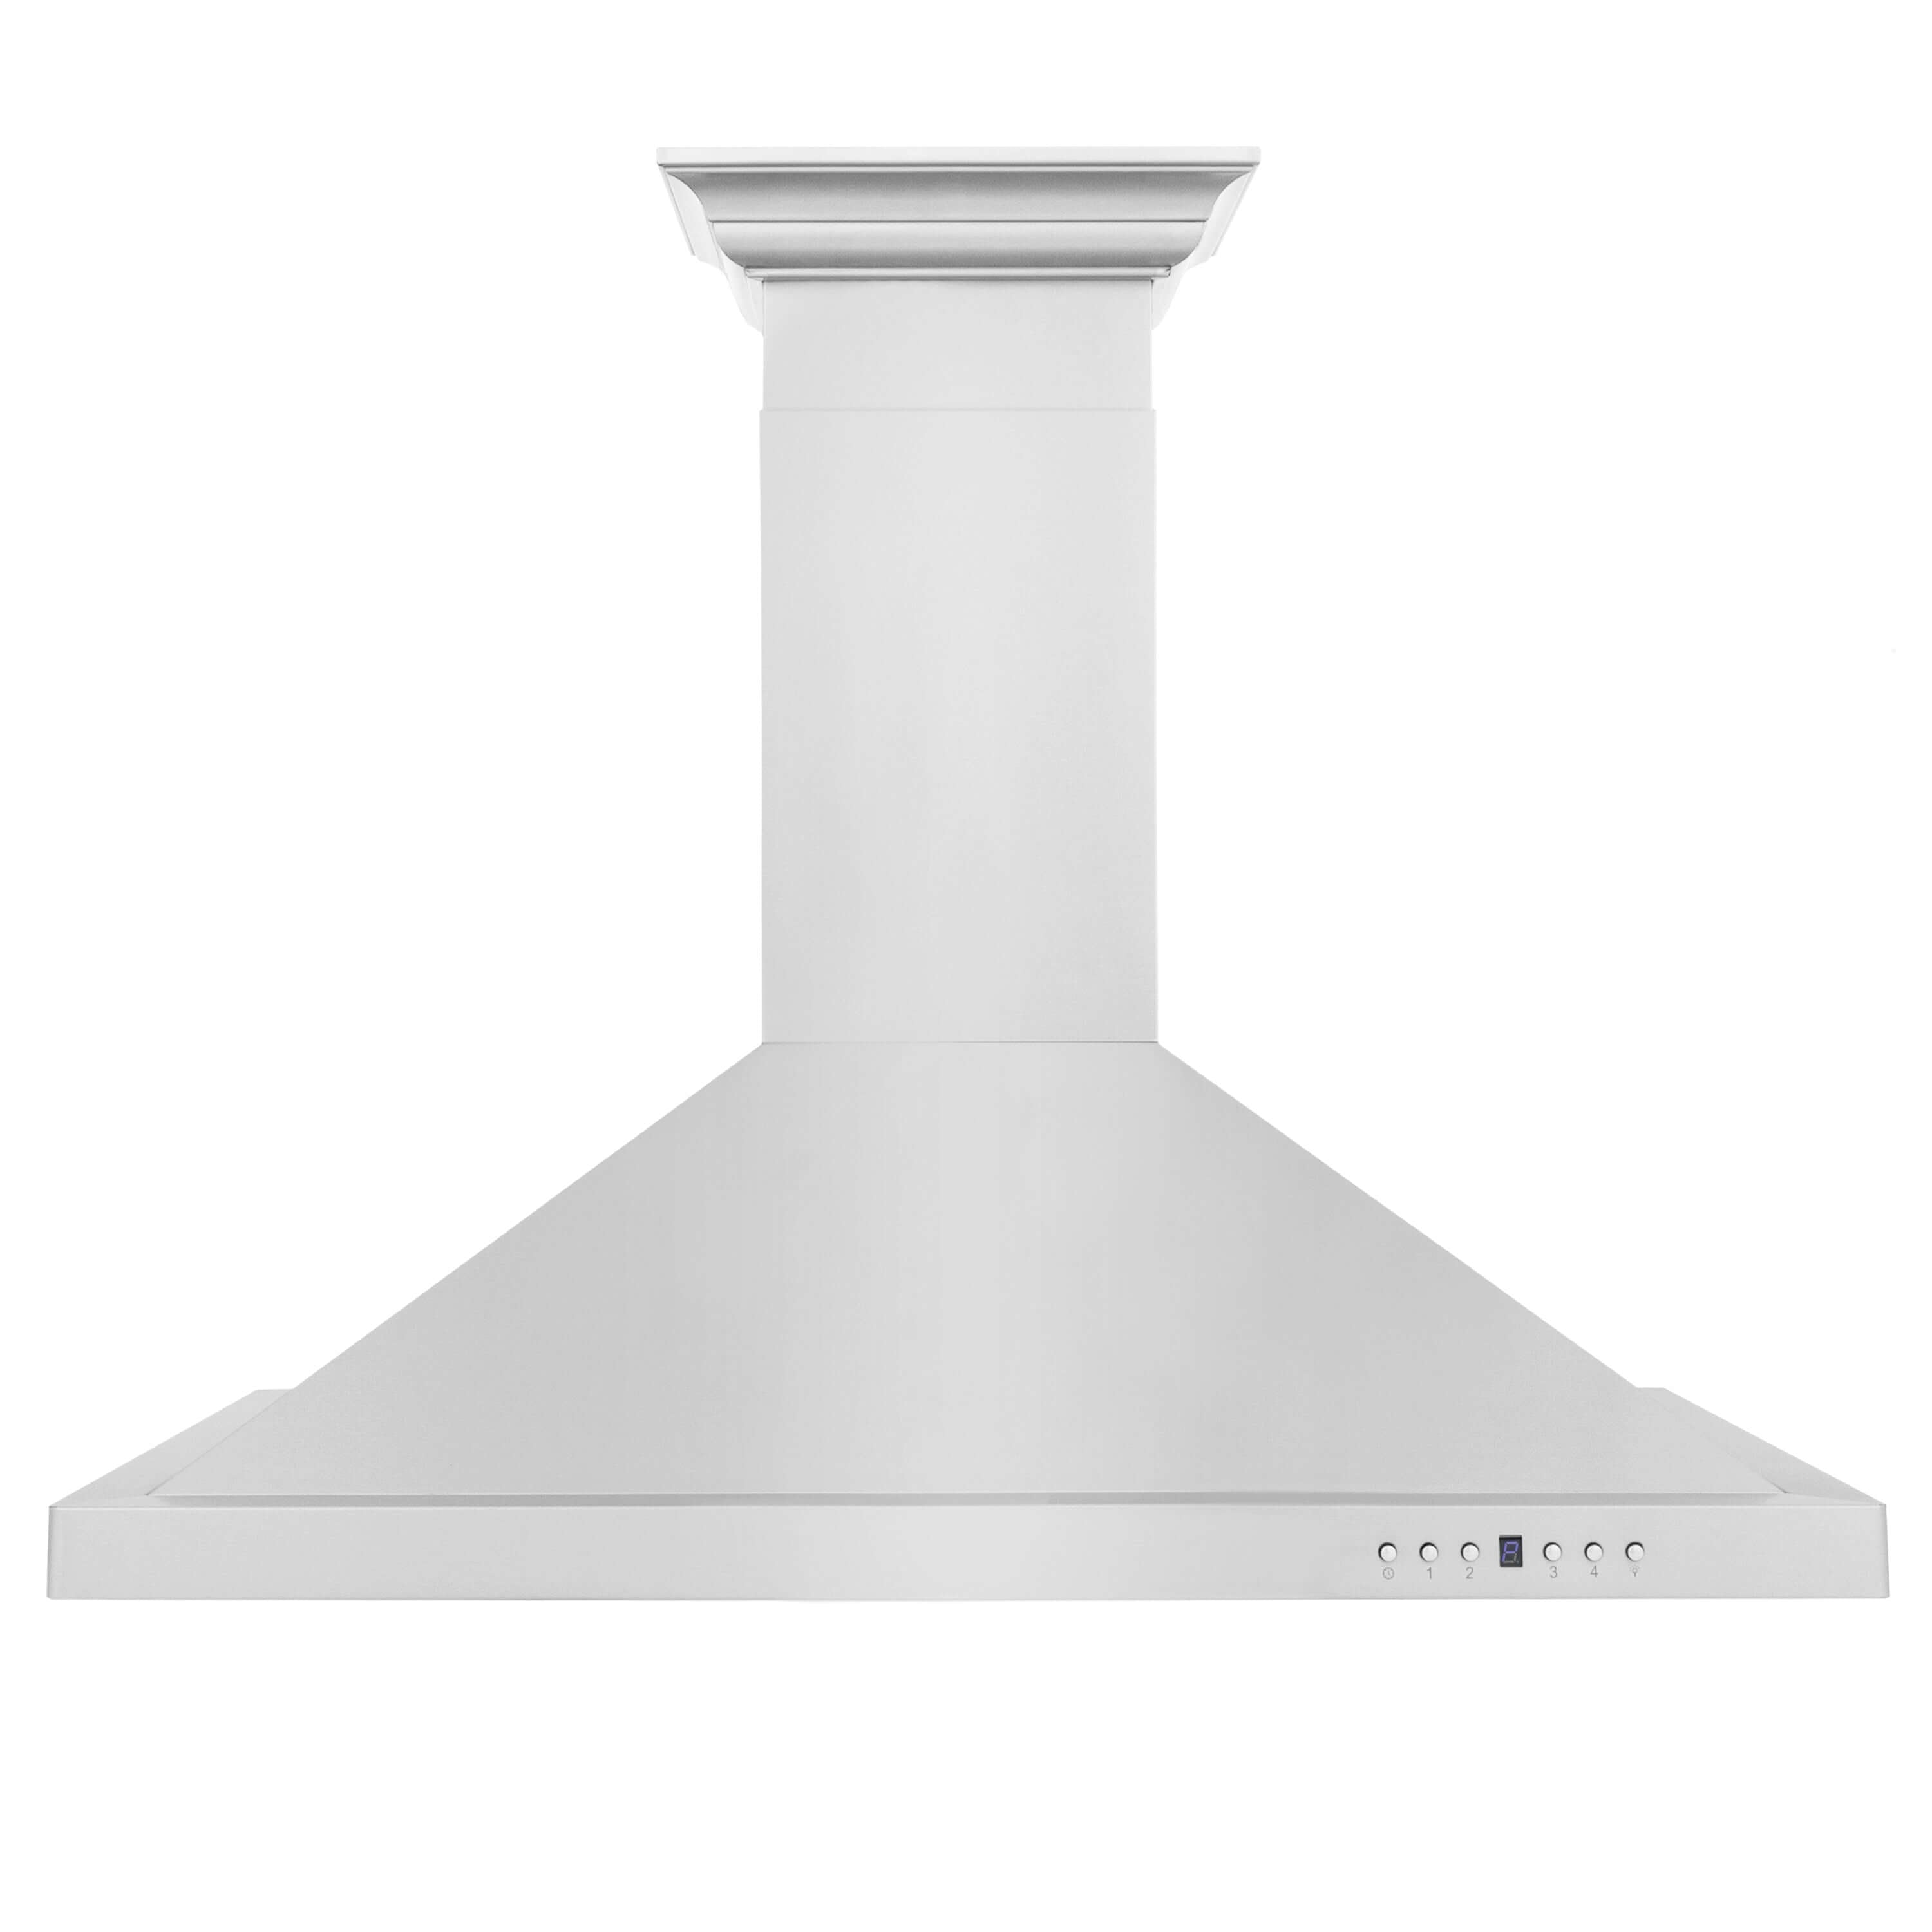 ZLINE 42" Convertible Vent Wall Mount Range Hood in Stainless Steel with Crown Molding (KBCRN-42)